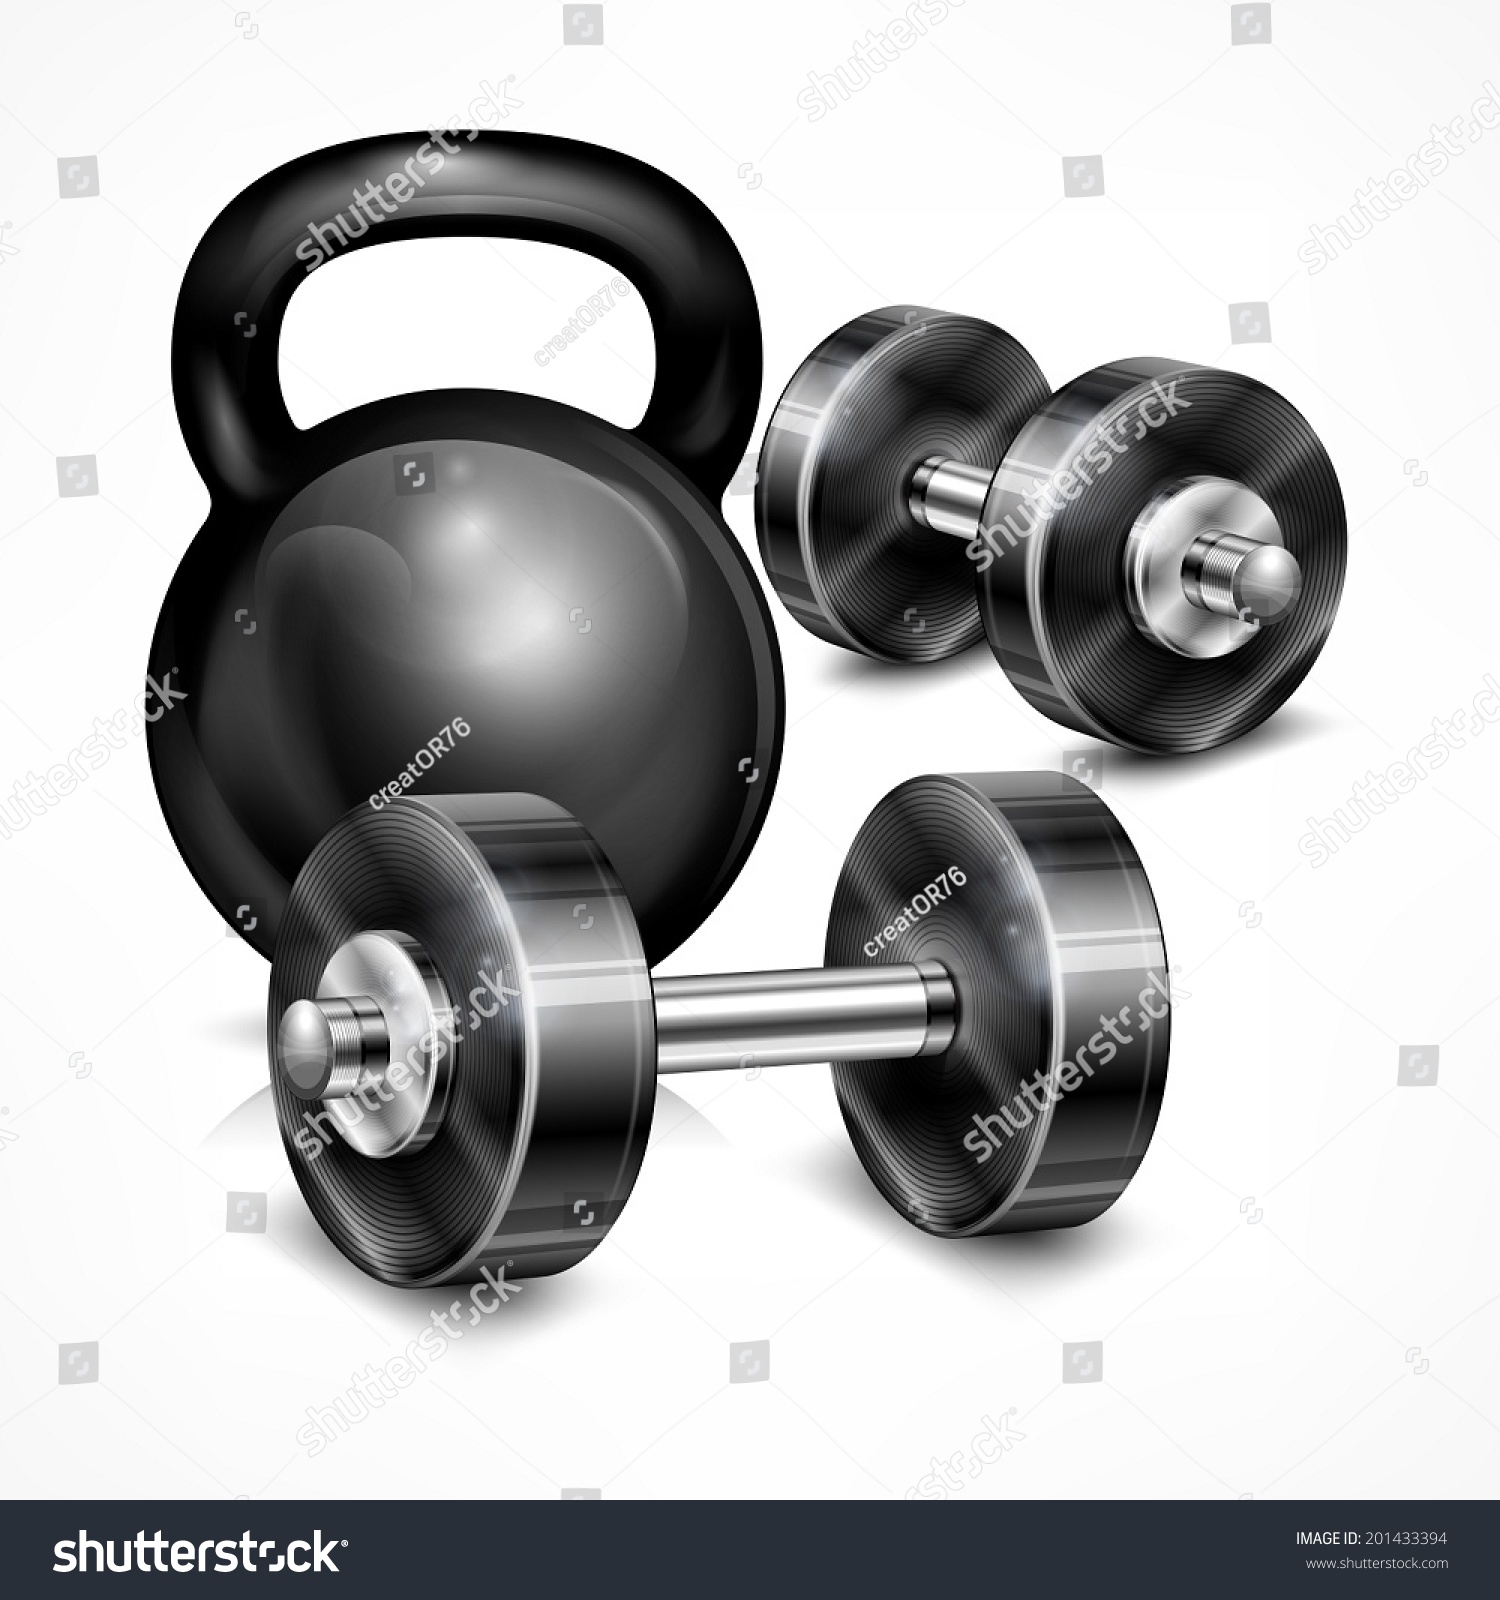 Metallic Kettle Bell Two Dumbbells On Stock Vector HD (Royalty Free ...